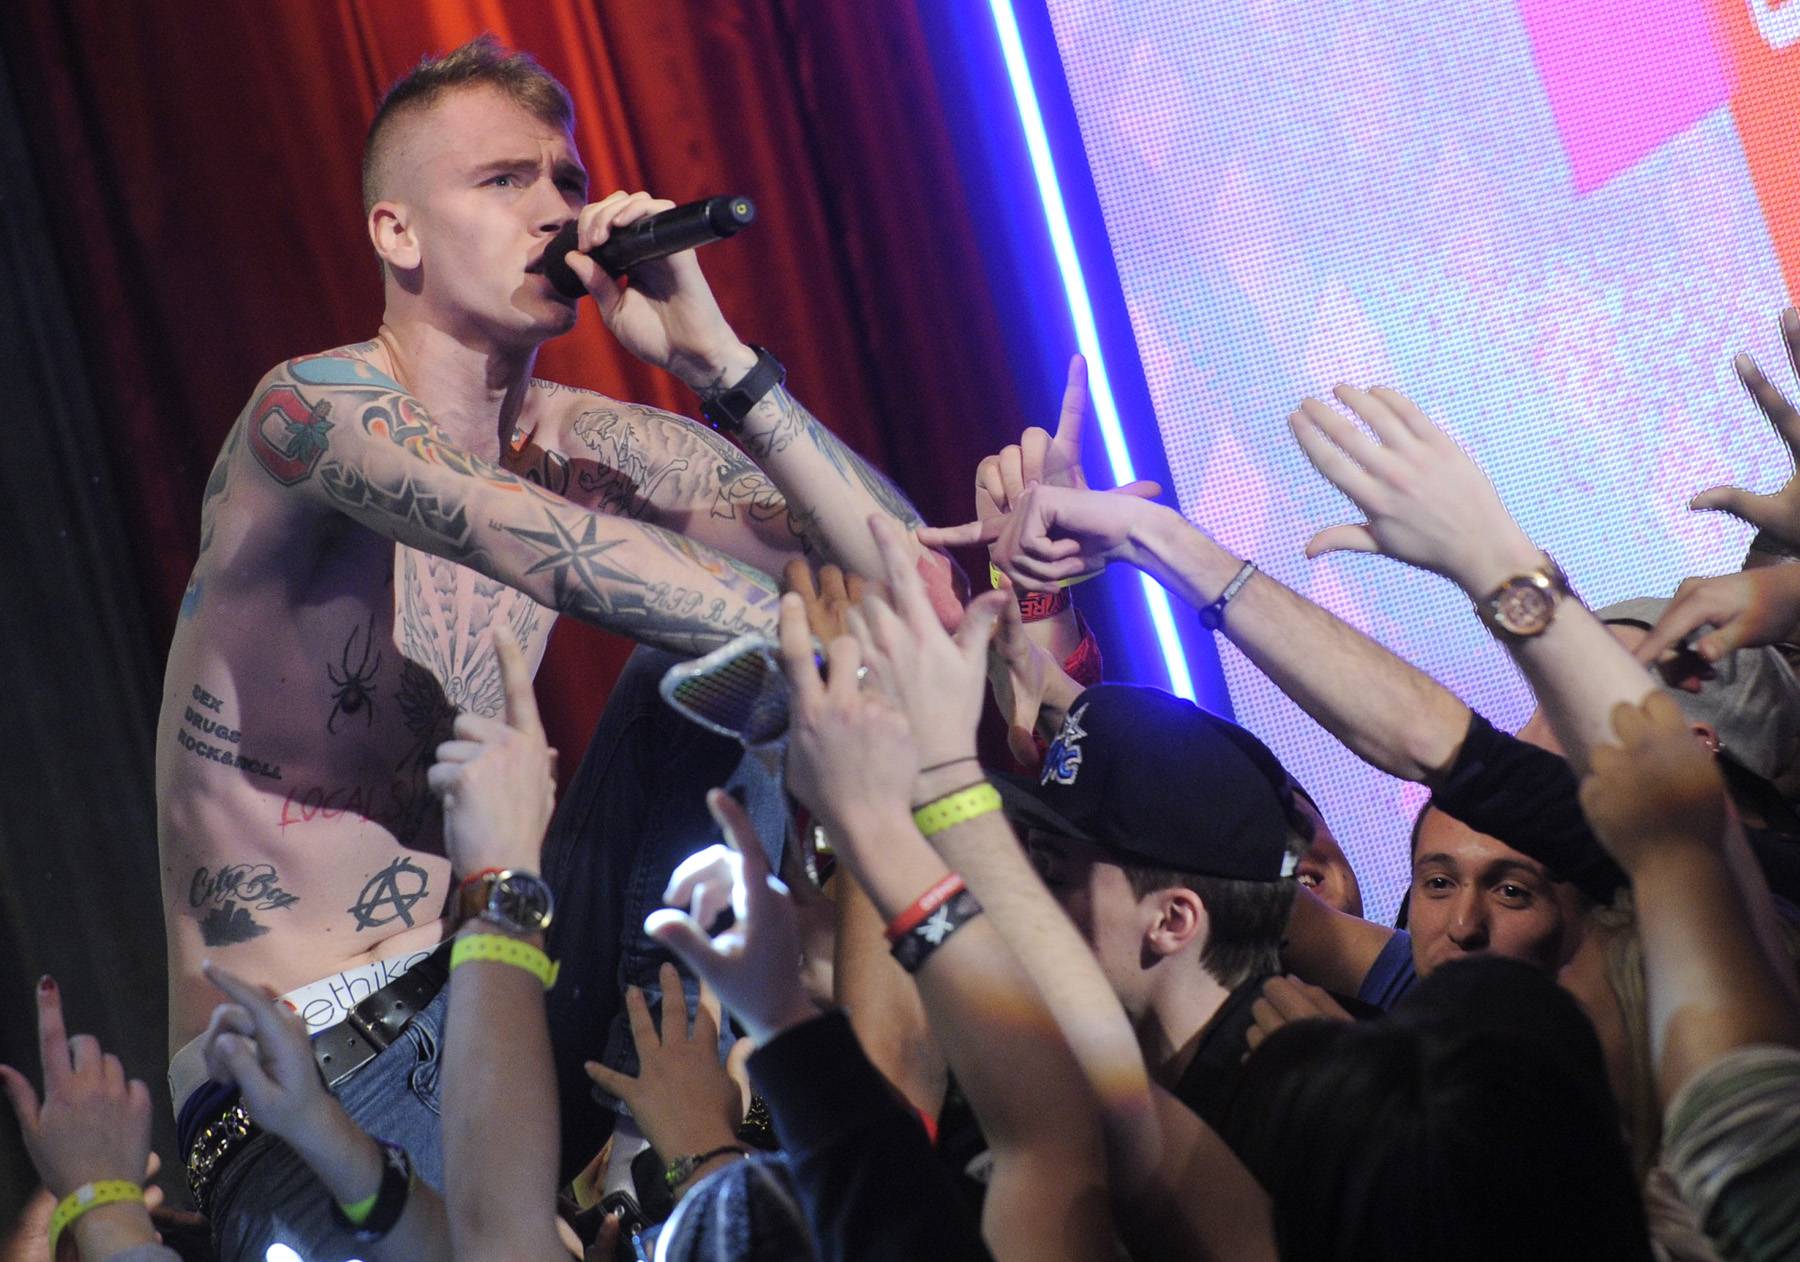 MGK - MGK is a rap beast now, but before he had a major deal, he hit the Apollo stage and won Amateur Night. Not too shabby!(photo: John Ricard / BET)